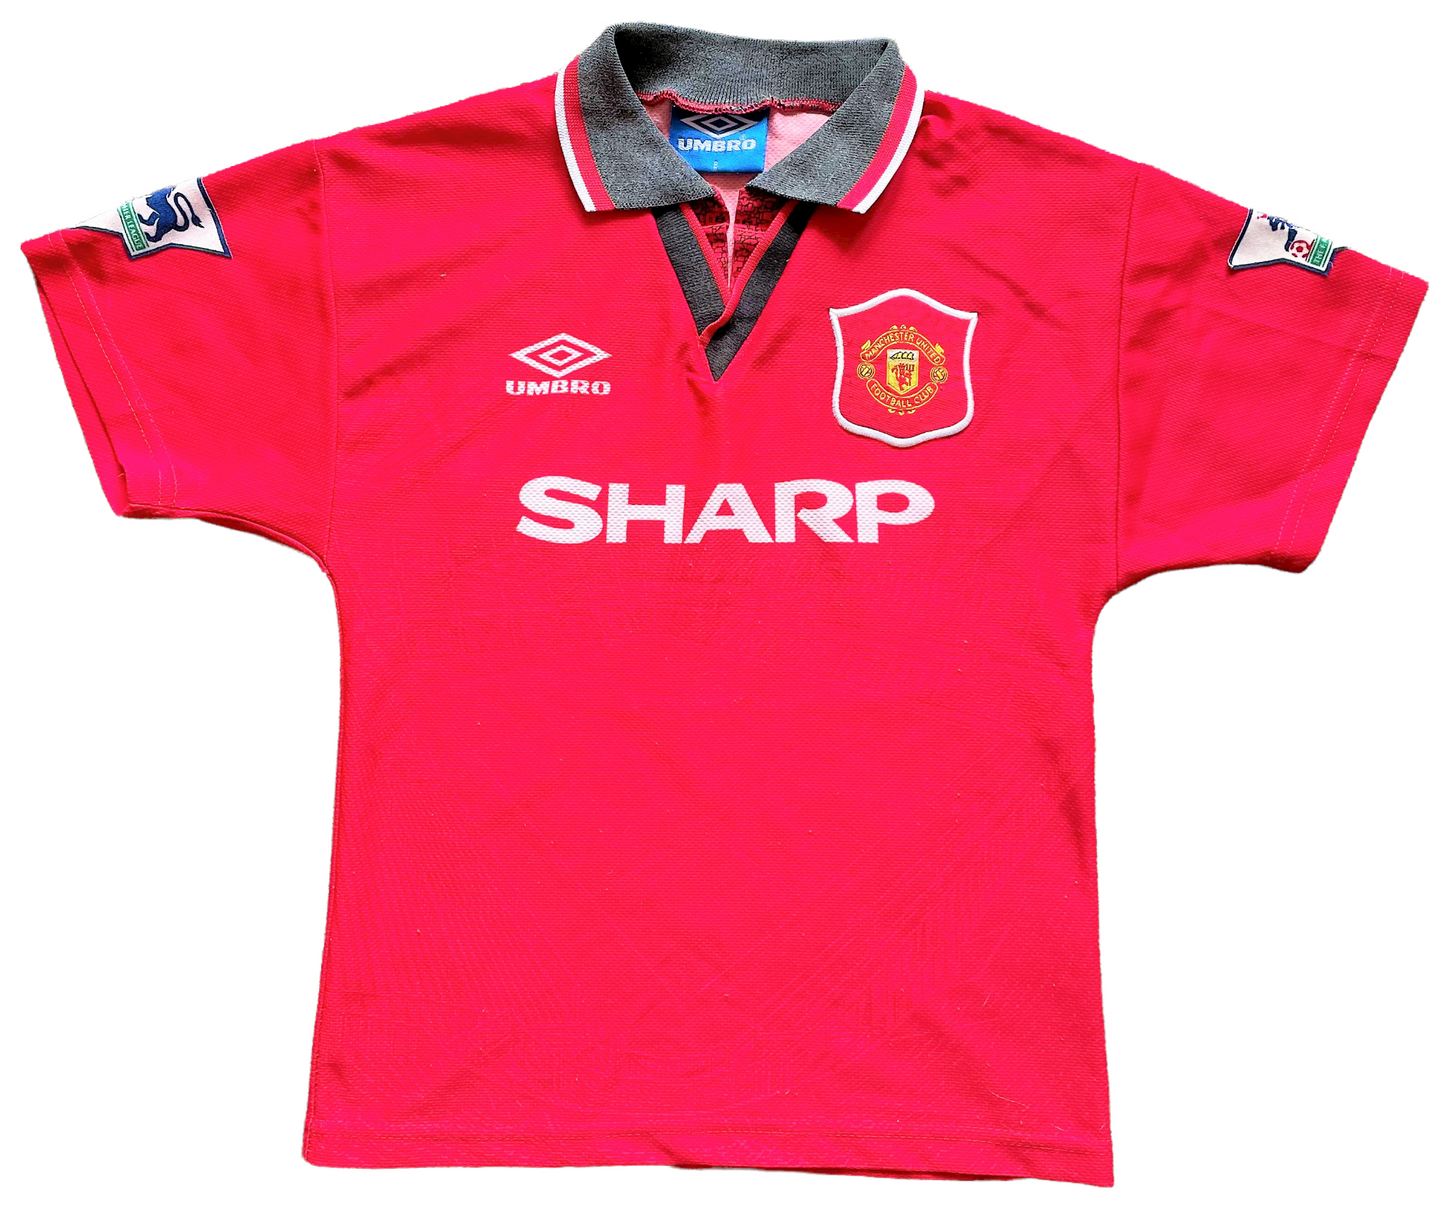 Man United Shirt 1994 HUGHES 10 (average) Childs. Height 16 inches